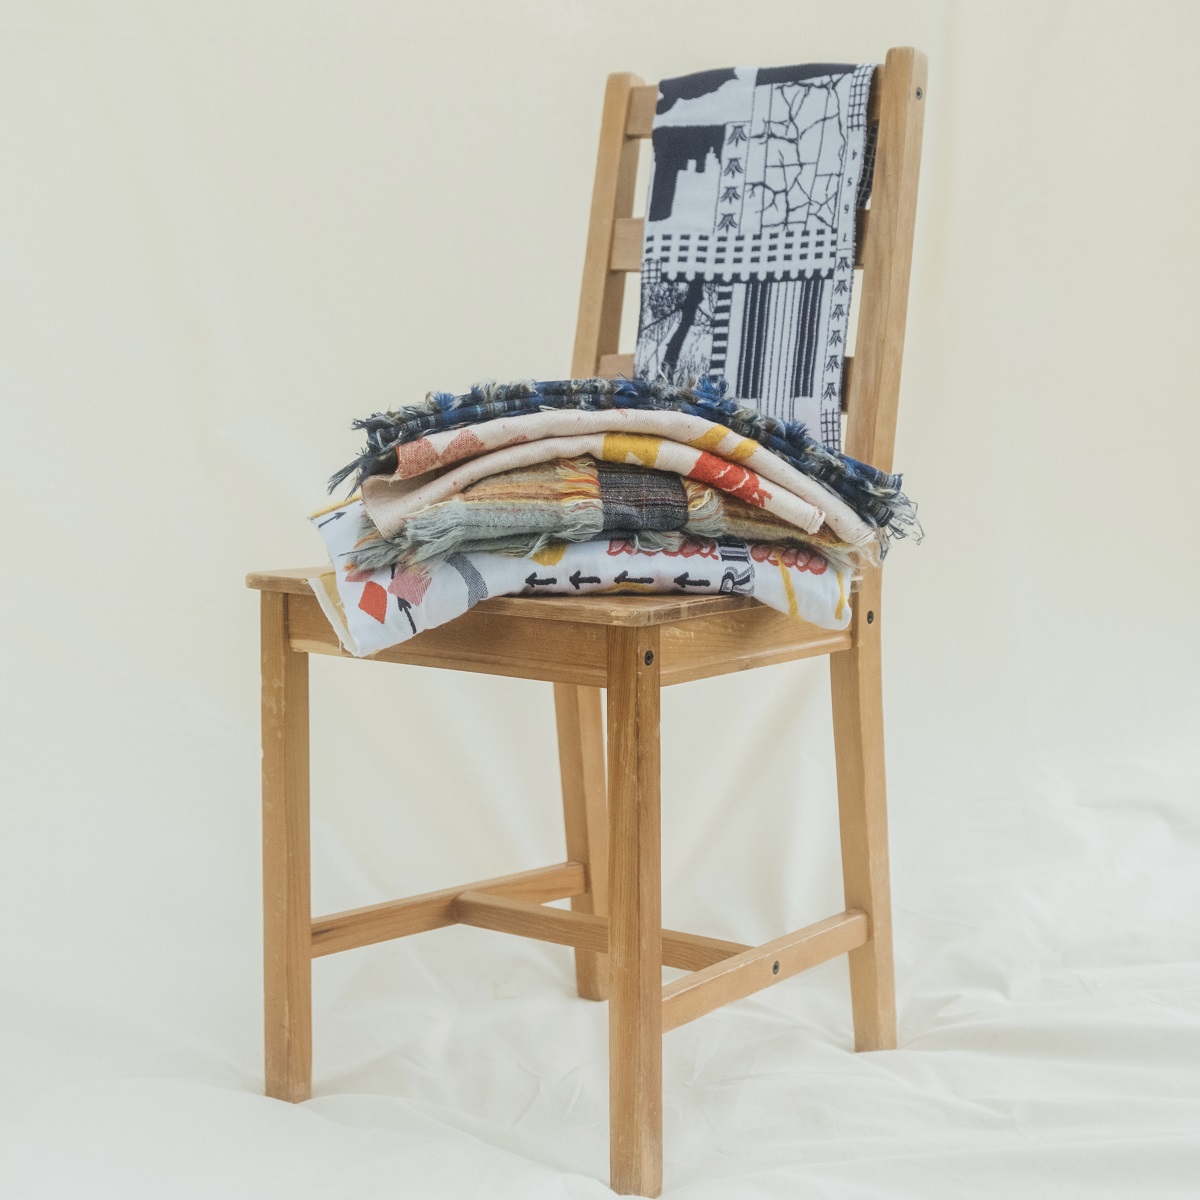 Drifter by Lara Pain with chair and upcycled woven textiles